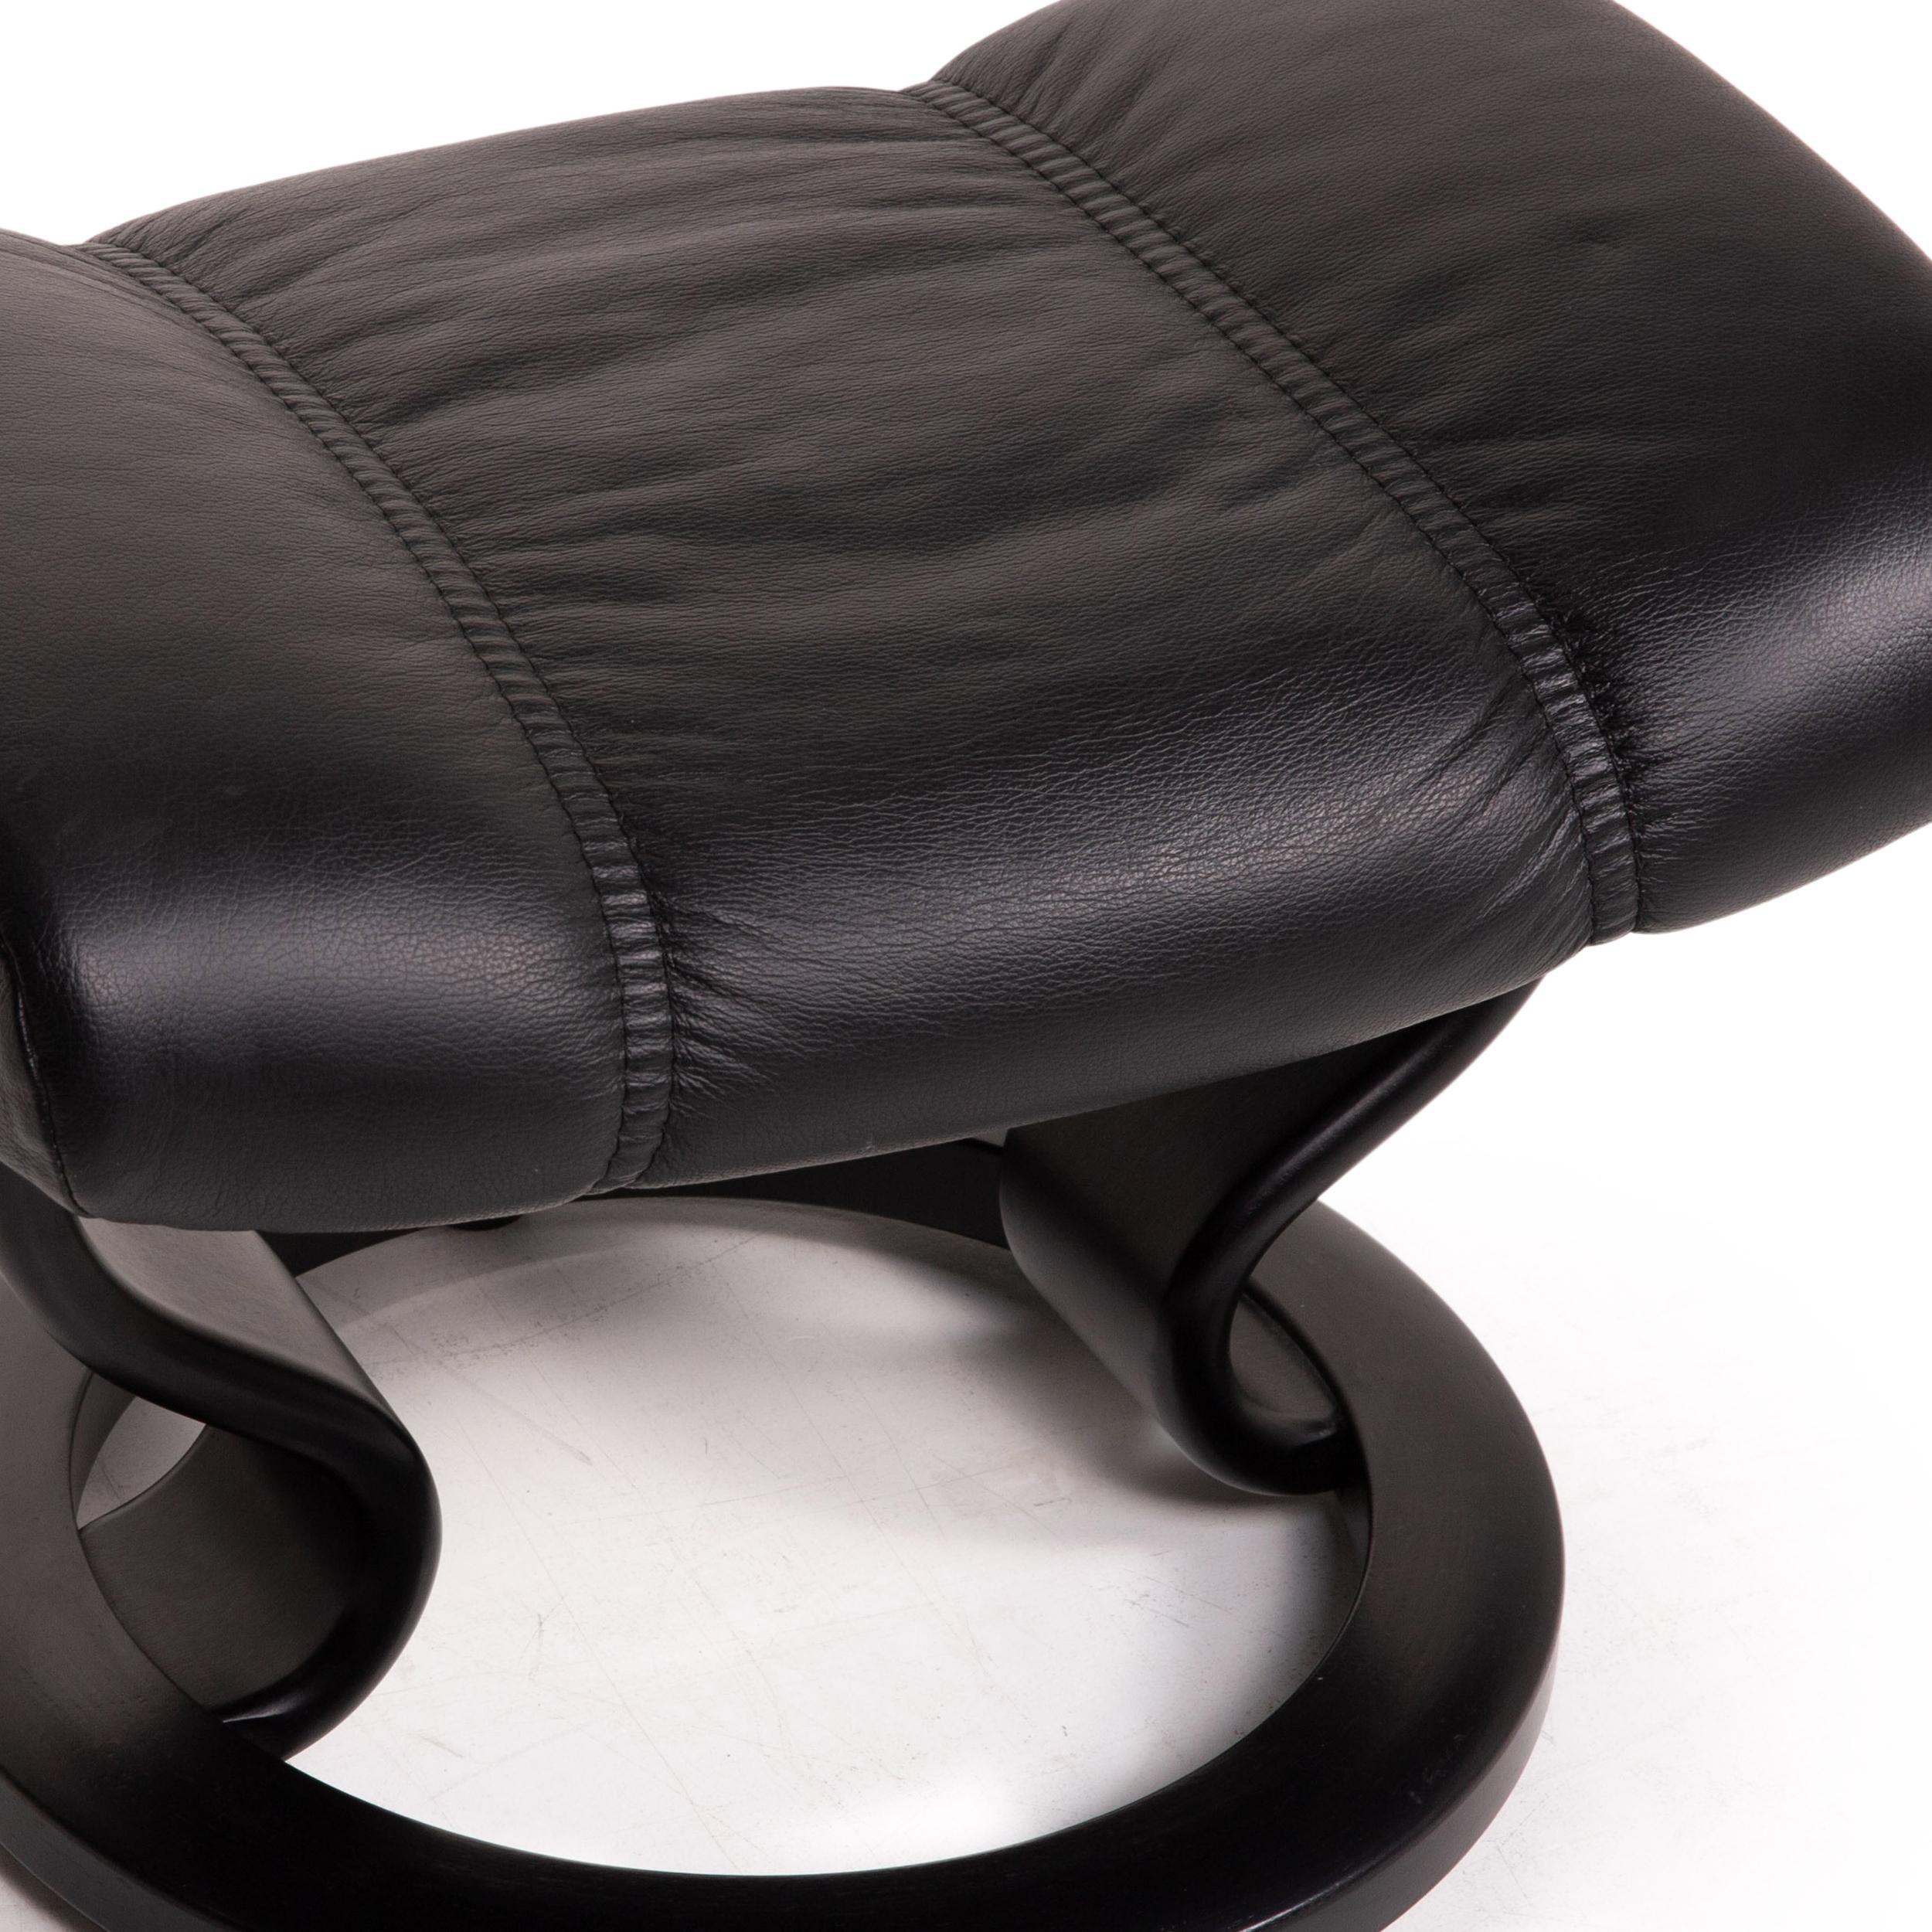 Stressless Consul Leather Armchair Incl. Stool Black Function Relaxation In Good Condition For Sale In Cologne, DE